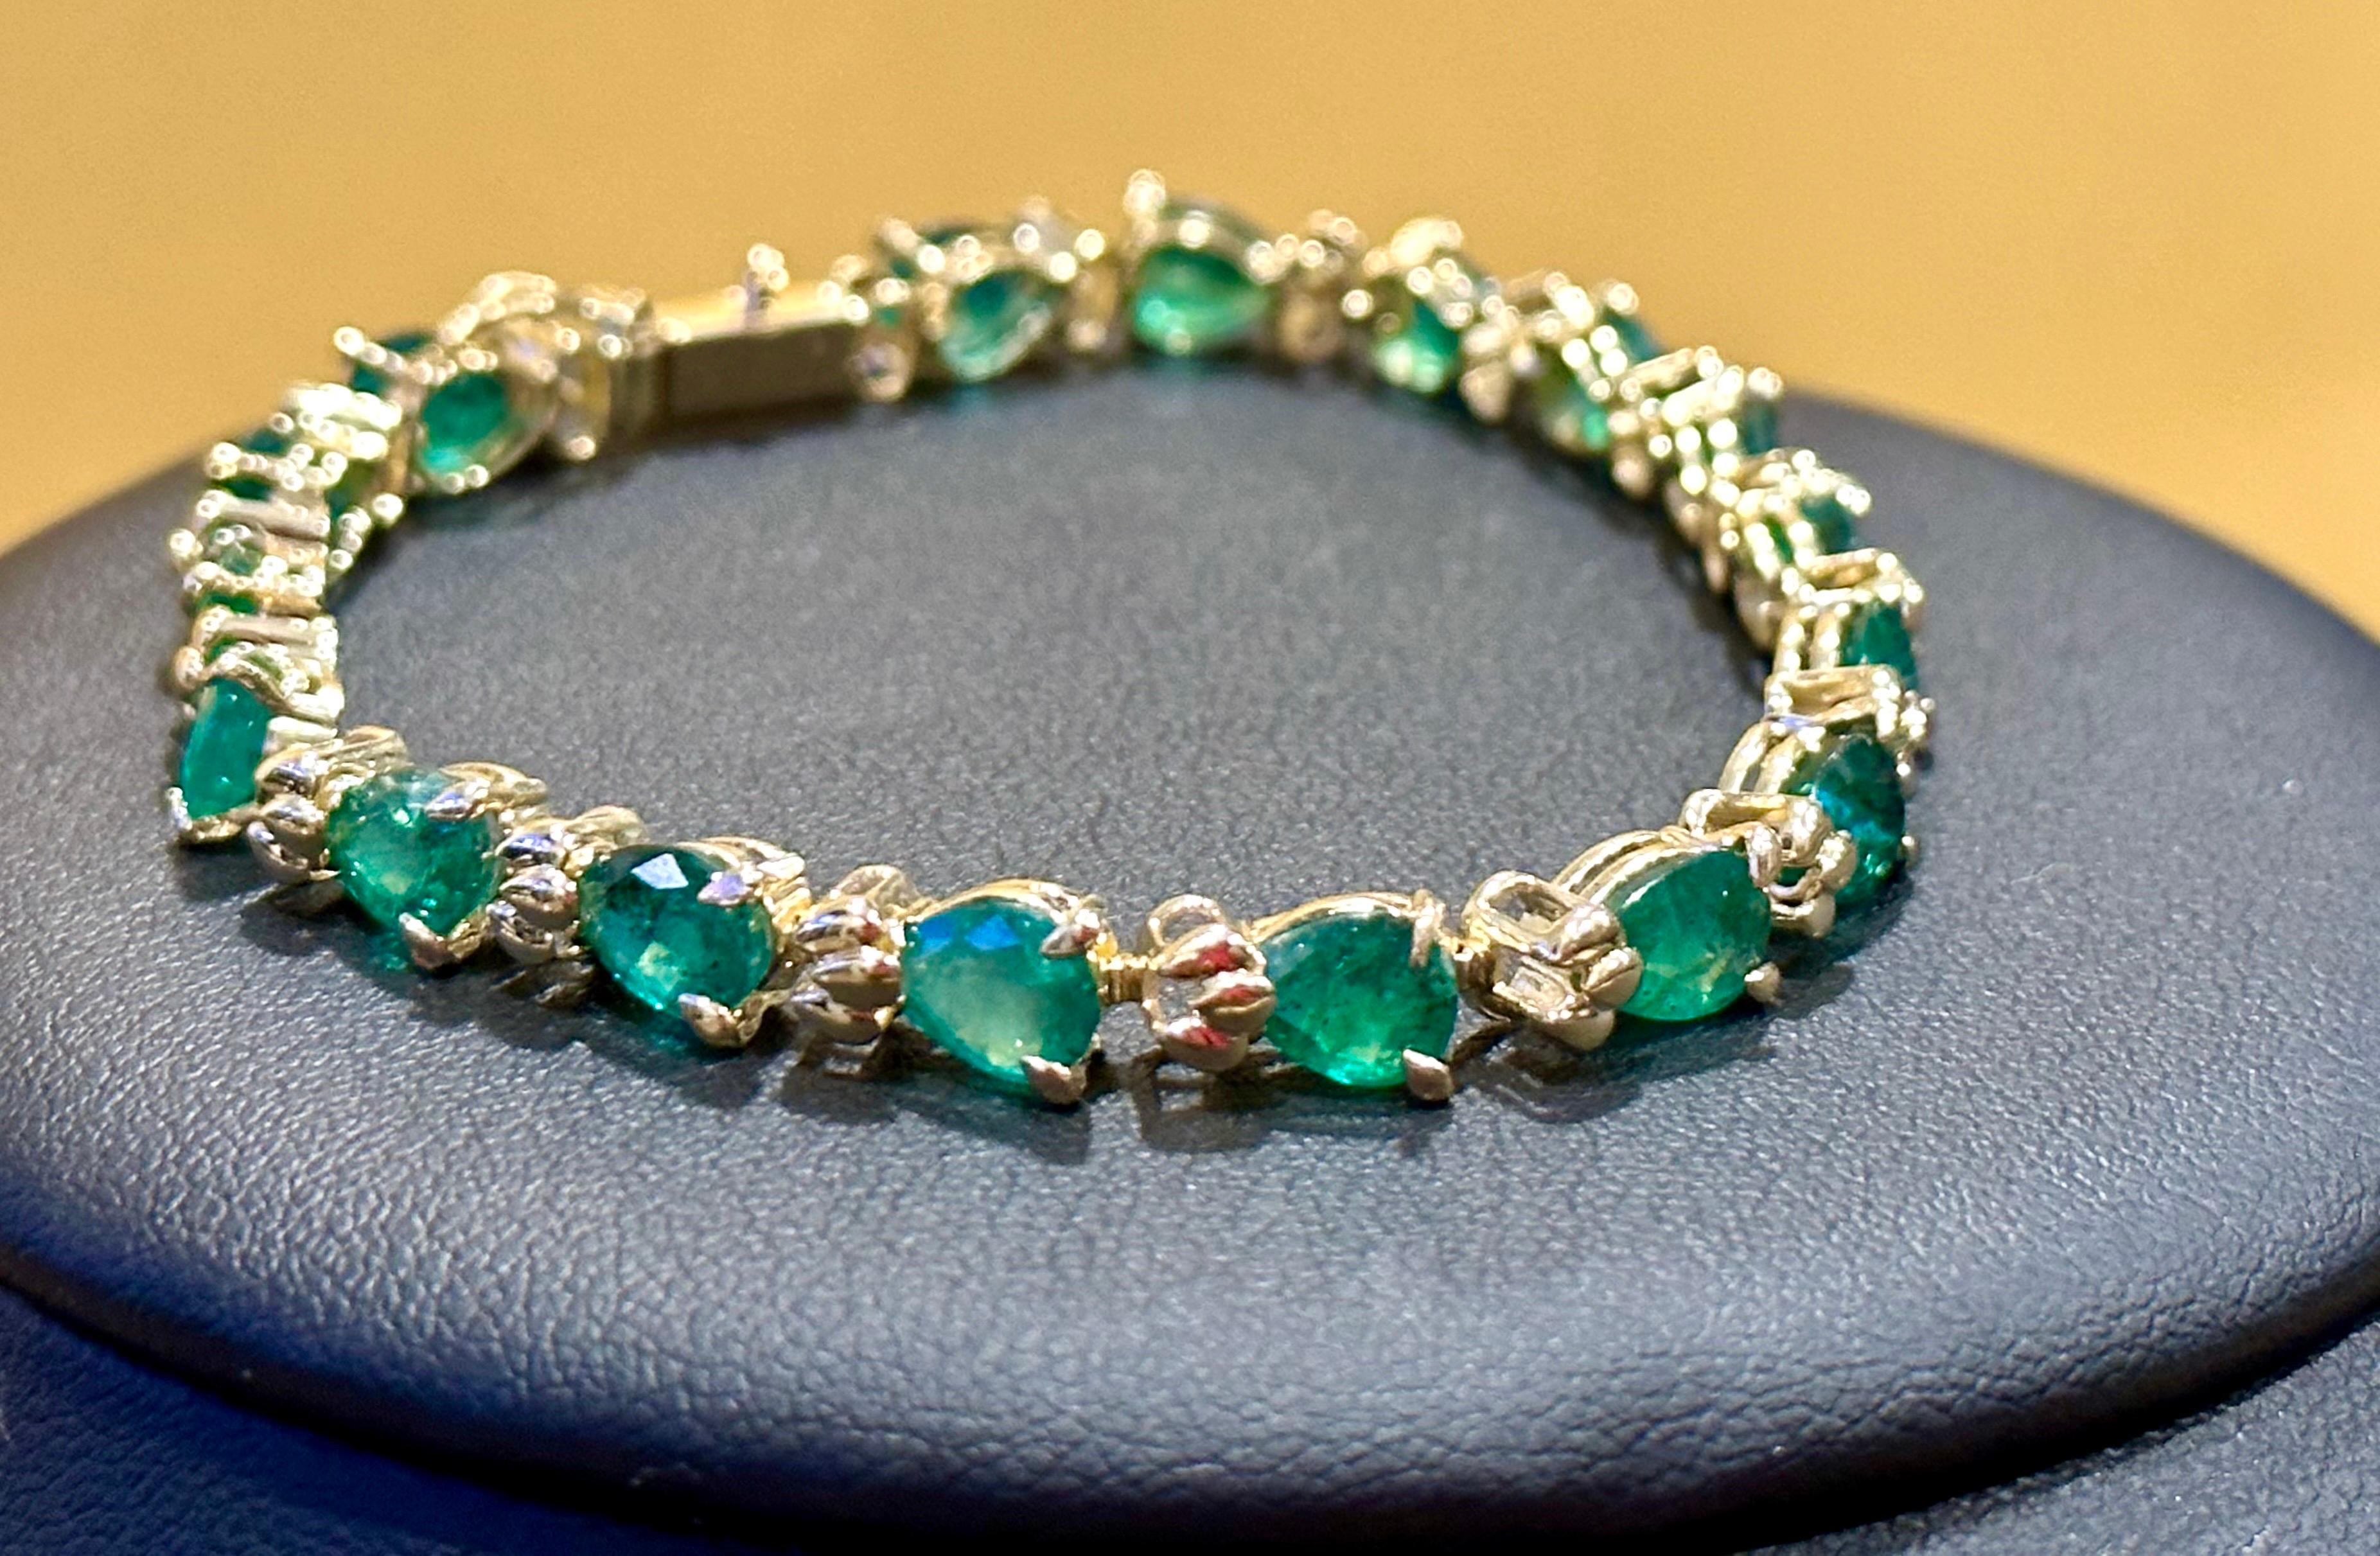  This exceptionally affordable Tennis  bracelet has  17 stones of Pear shape  Emeralds  . Each Emerald is spaced by a small gold design . Total weight of the Emeralds is  approximately 9 carat. 
The bracelet is expertly crafted with 10 grams of  14